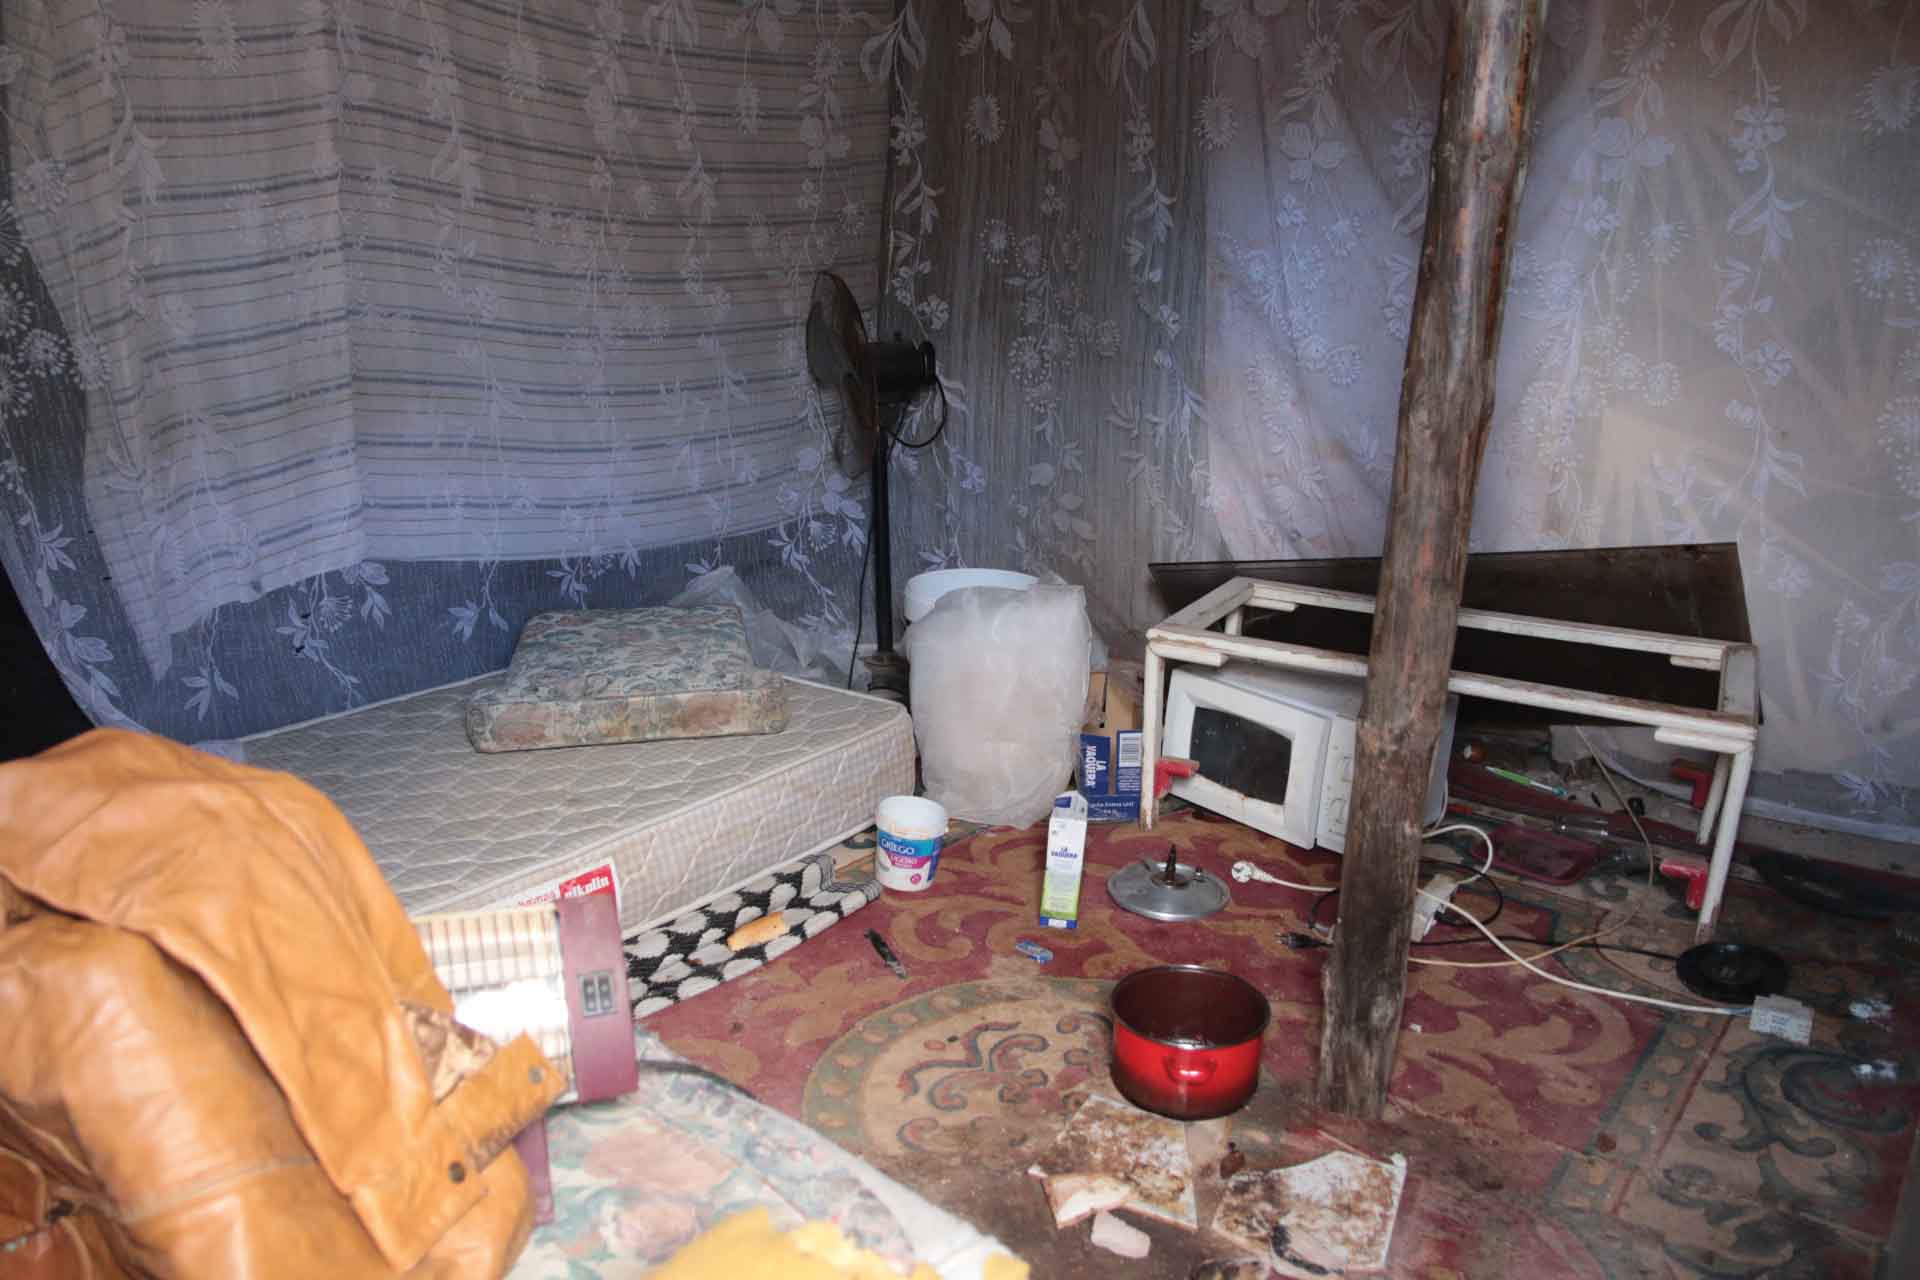 Interior of the home of a migrant worker in a settlement in Almería